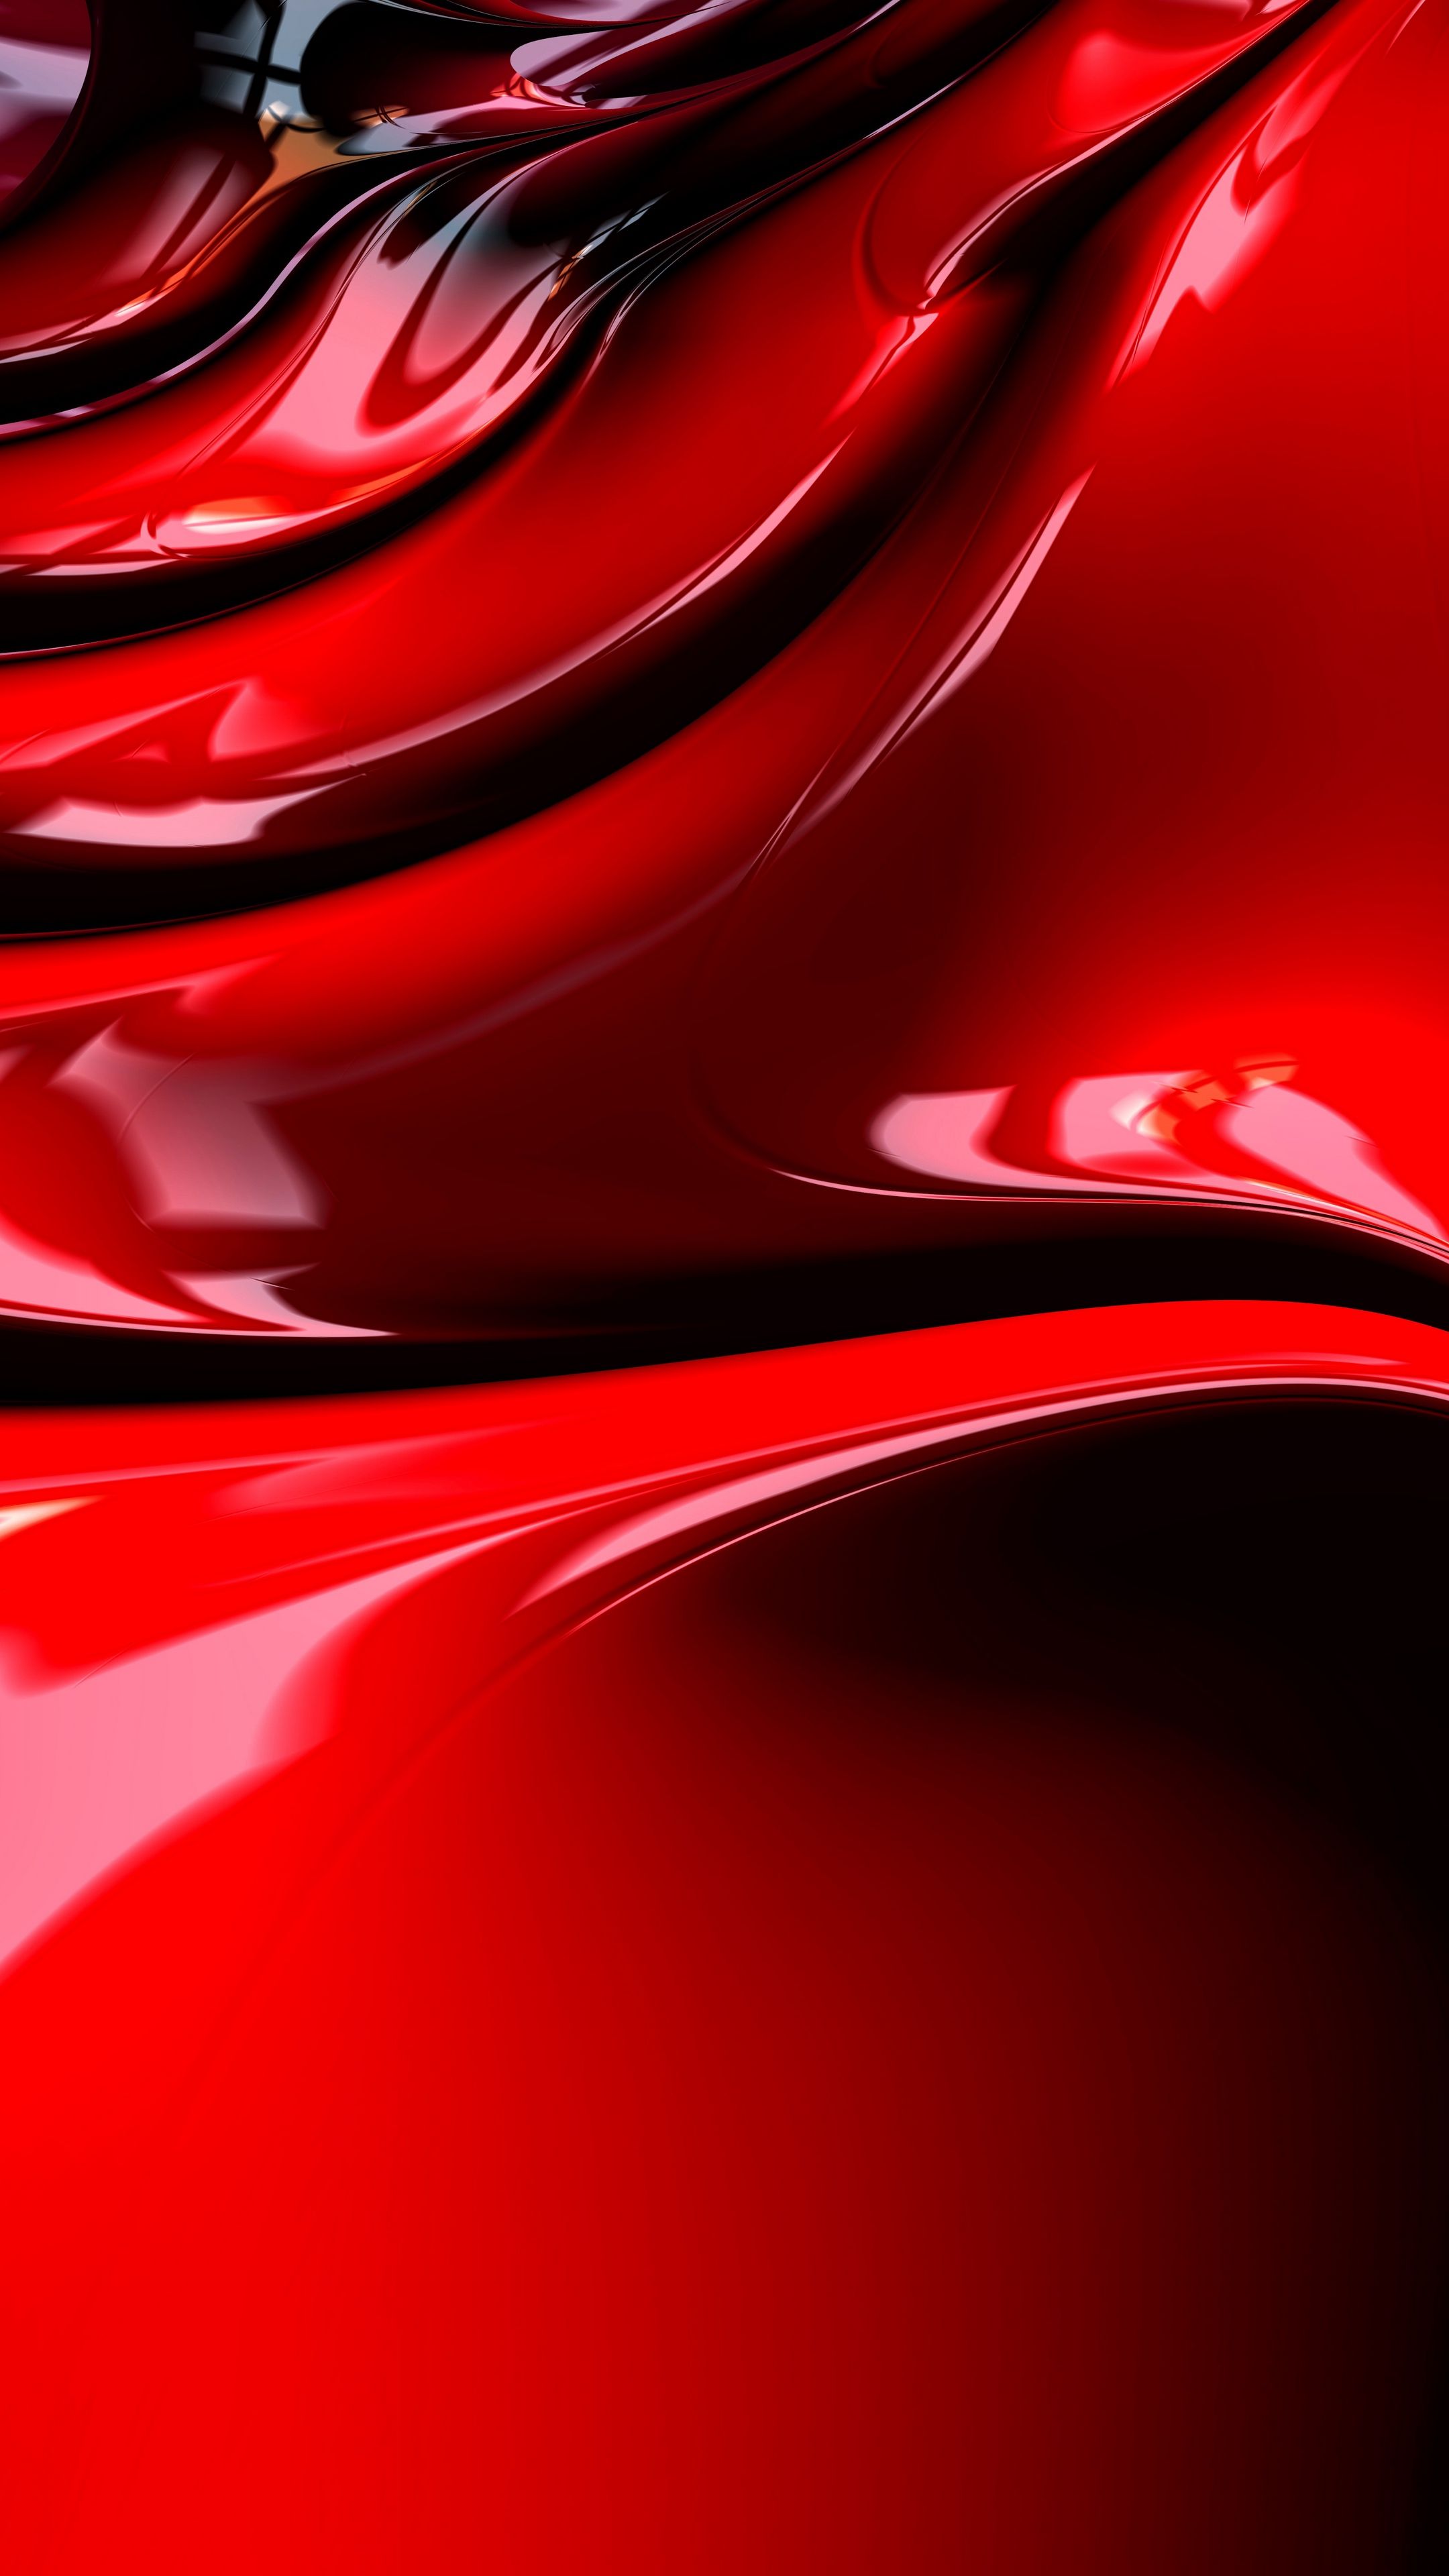 Abstract #fractal, #structure, #surface, #shape, #red #wallpaper